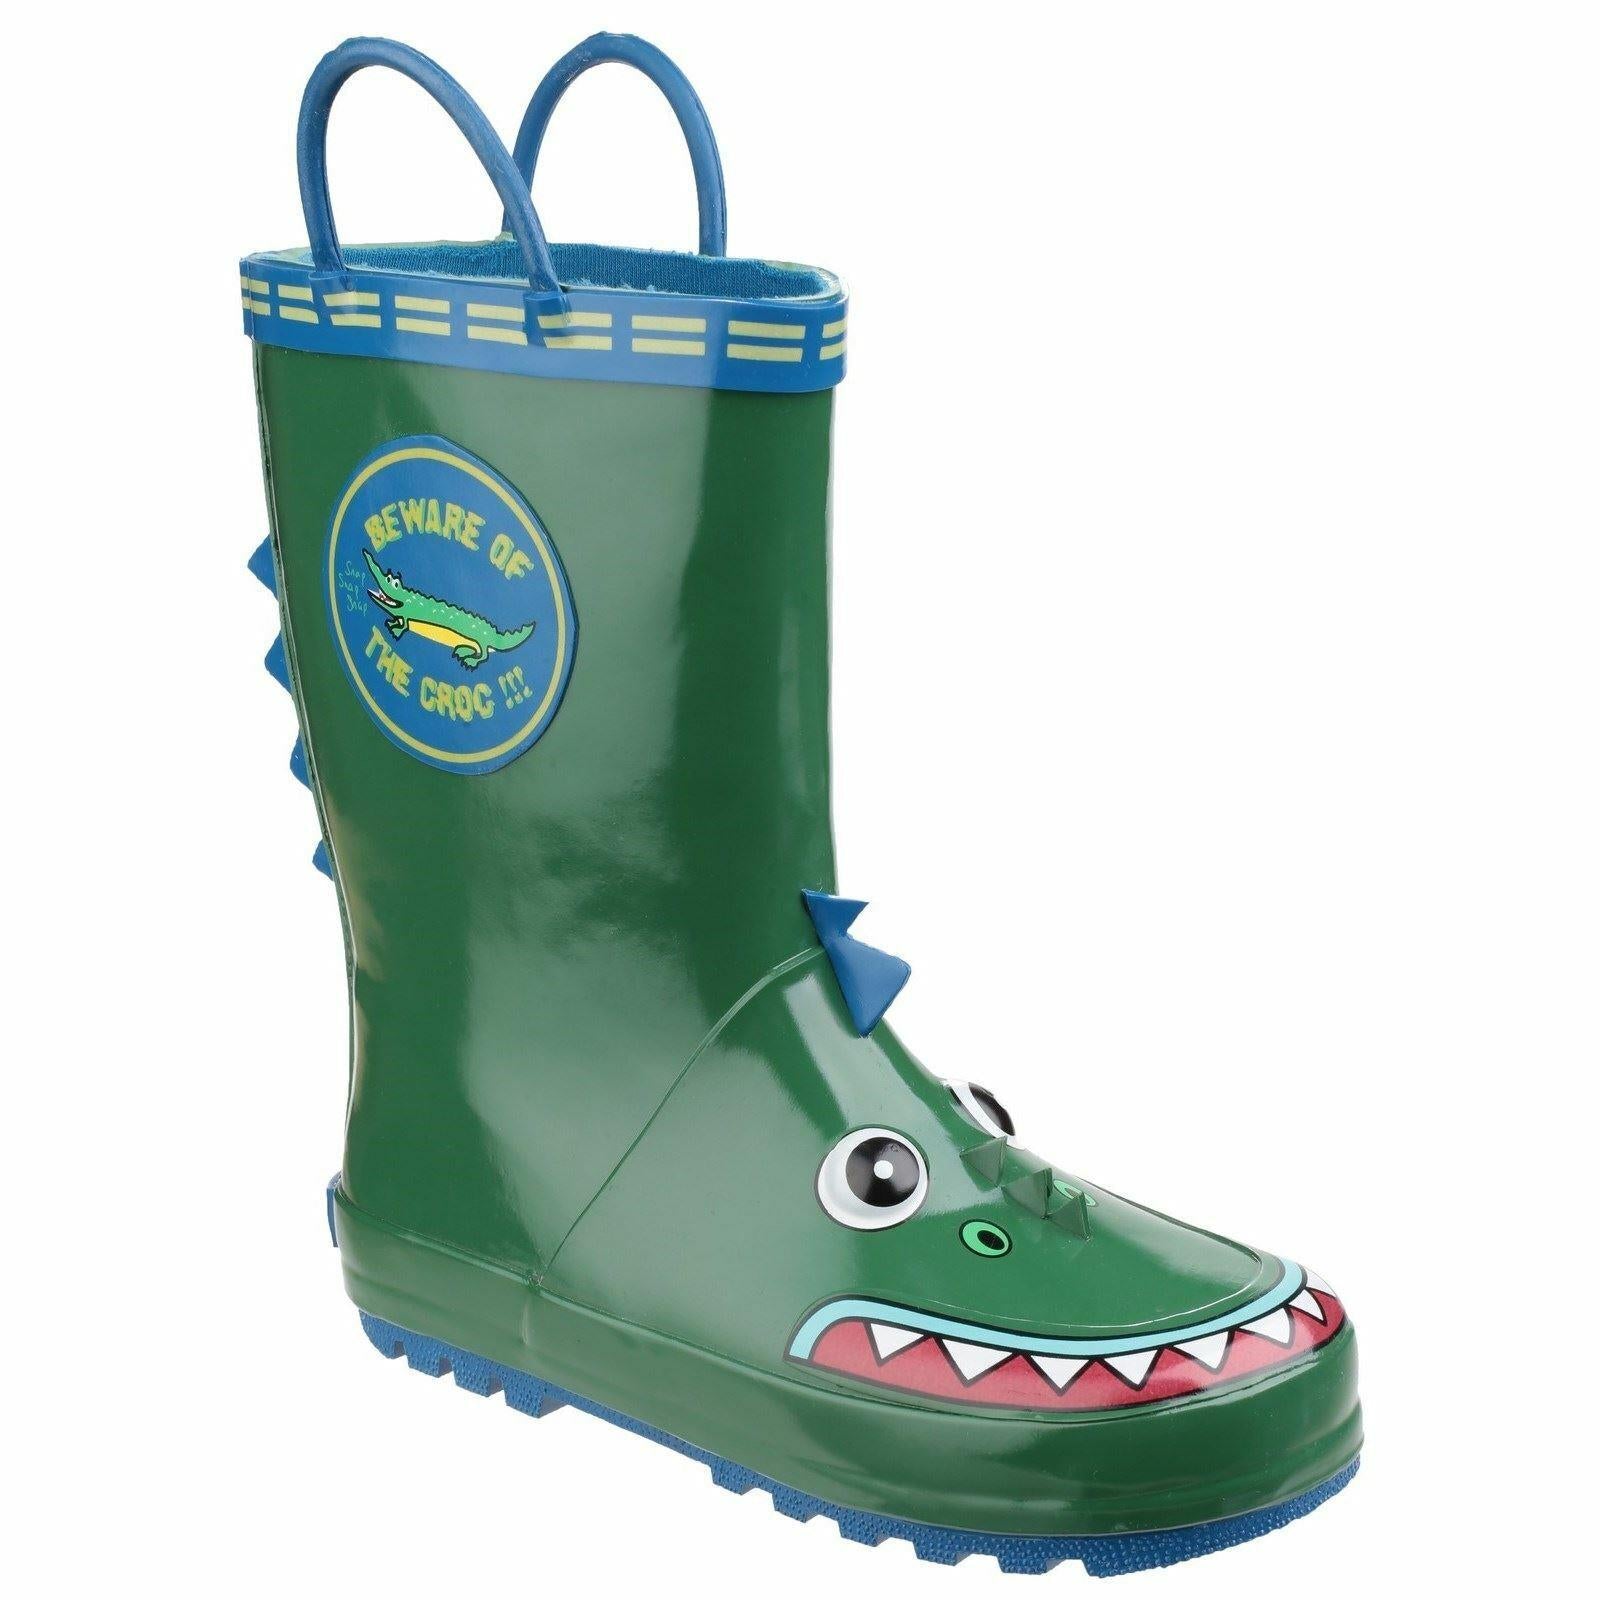 Cotswold Puddle Crocodile kid's rubber waterproof pull-on wellington boot